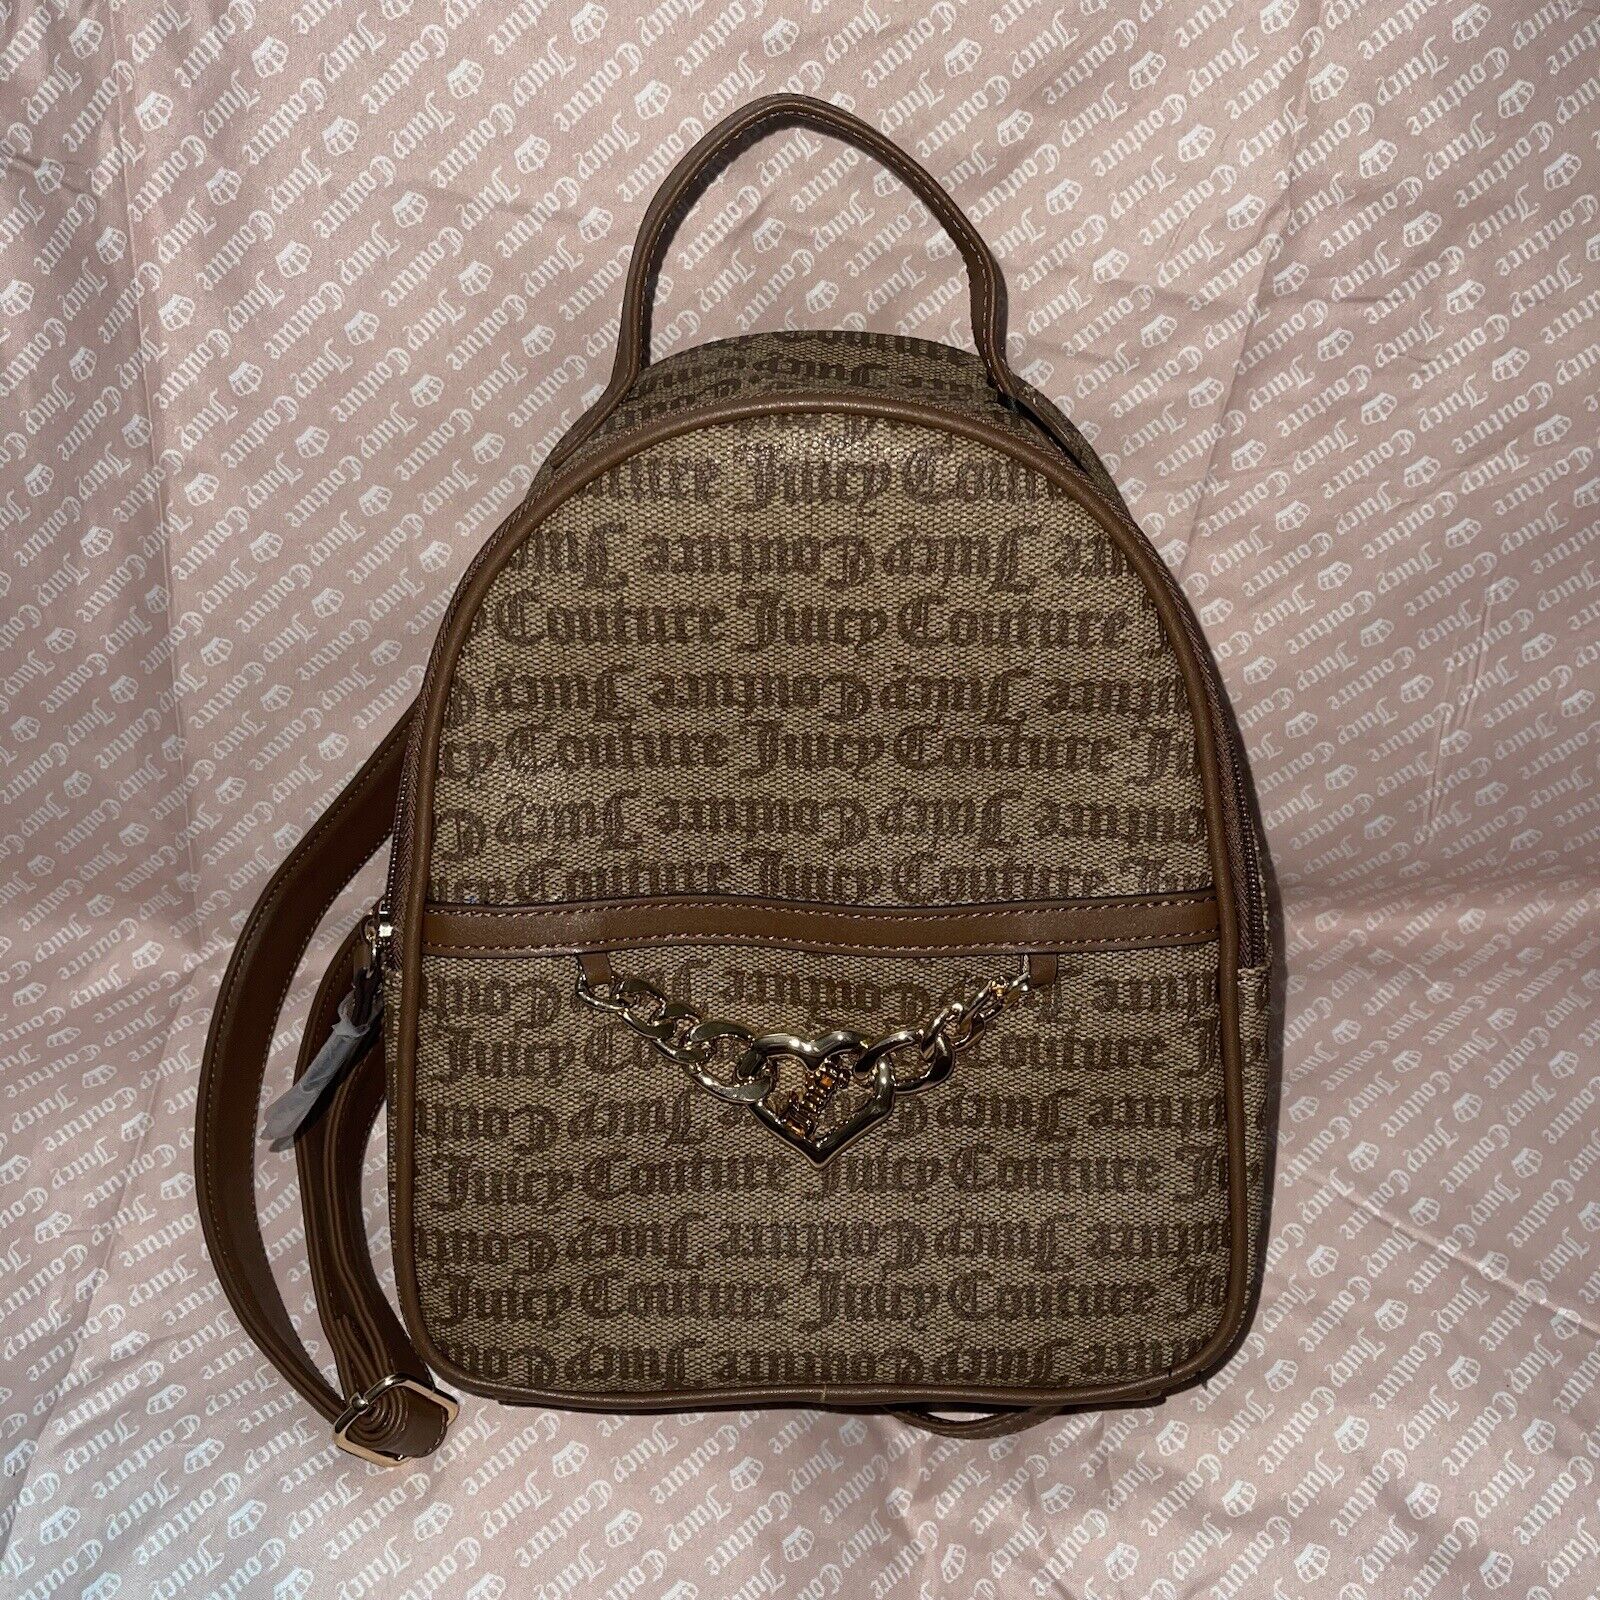 NWT Juicy Couture Chestnut Chino Change of Heart Backpack